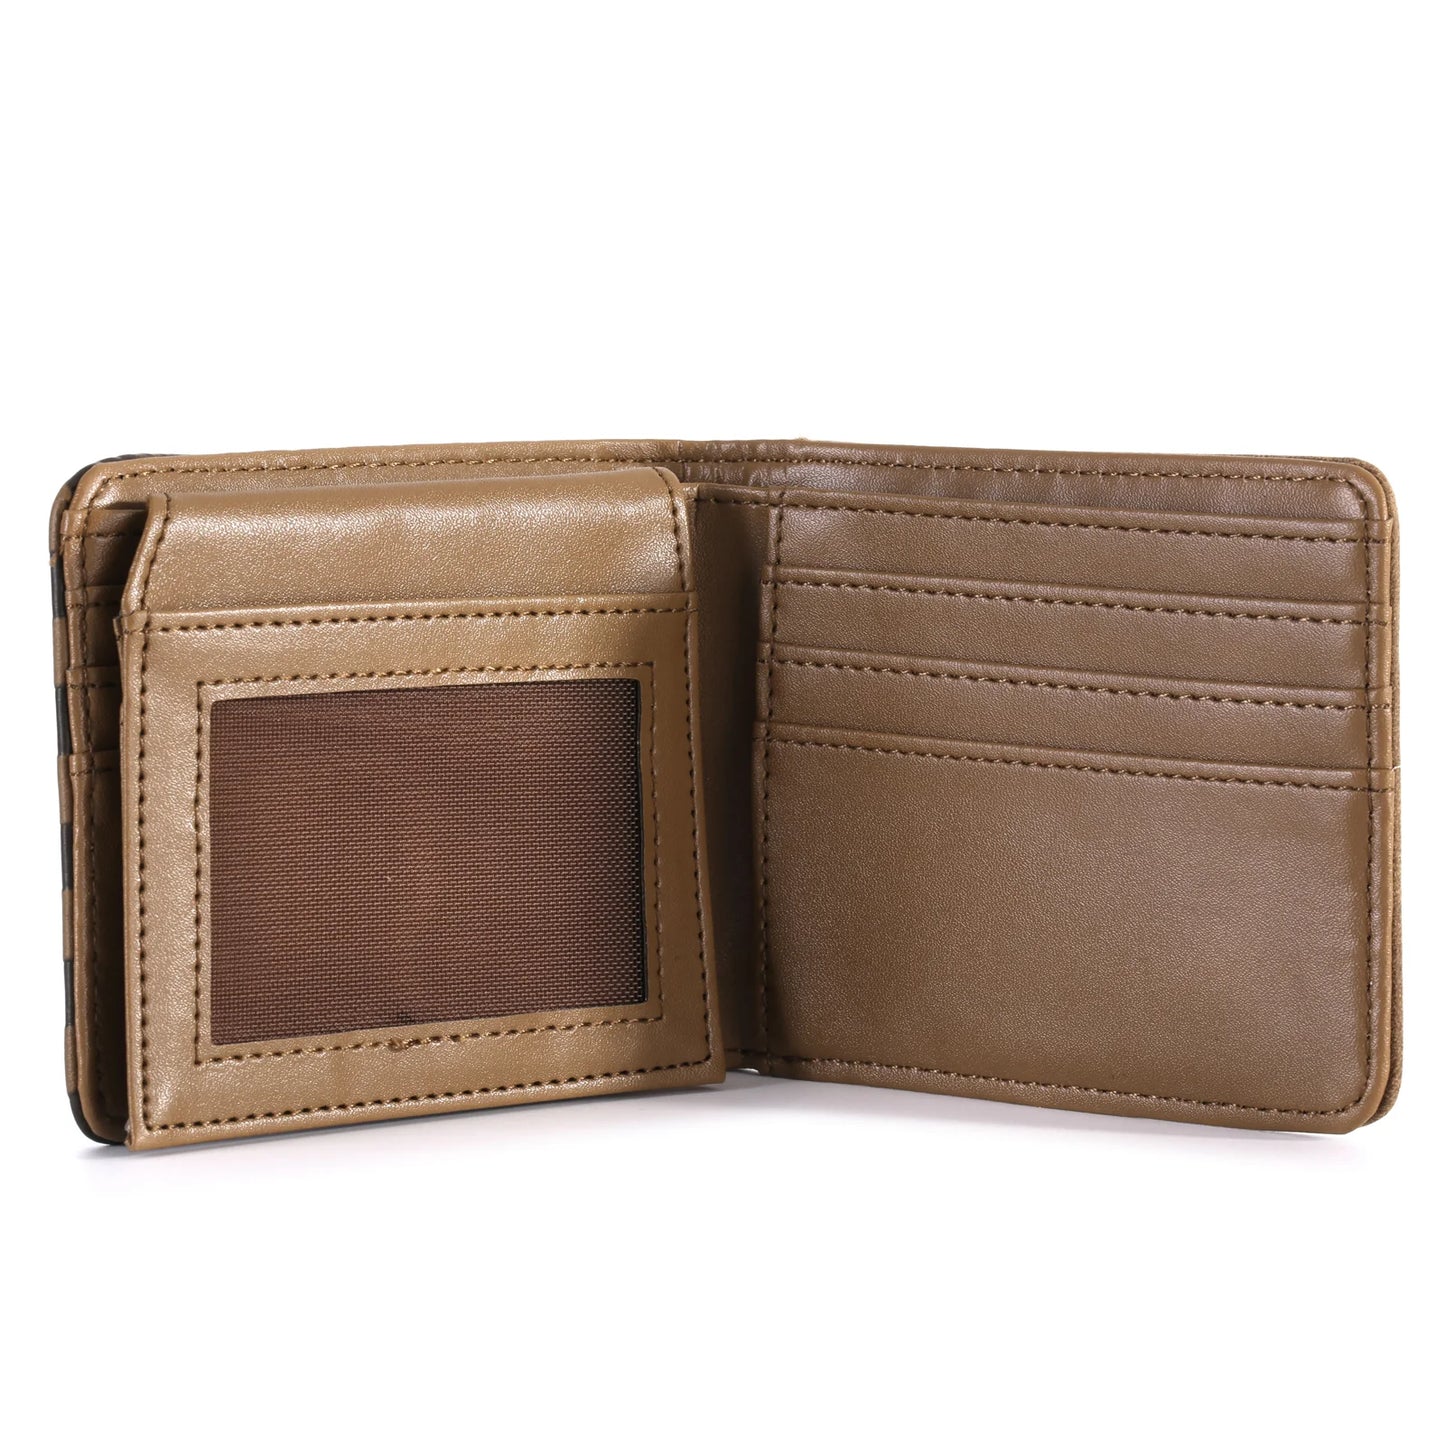 American Pride Collection Men's Bifold PU Leather Wallet